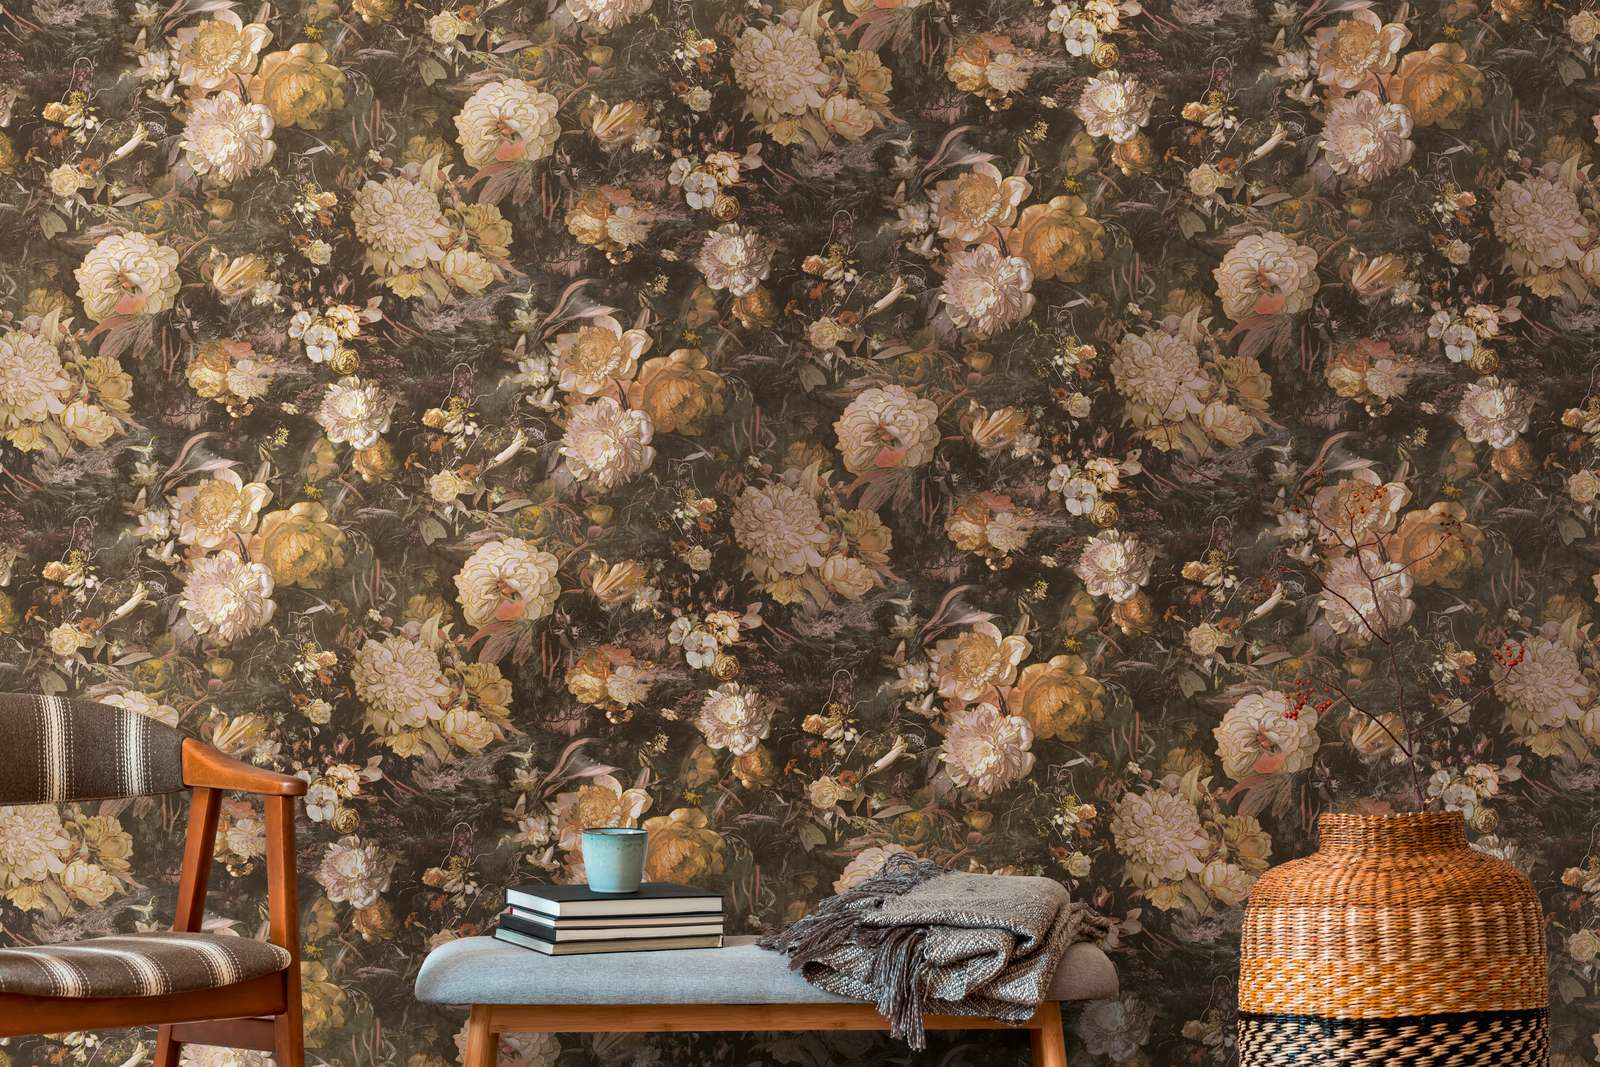             Art style floral wallpaper with roses - yellow, brown
        